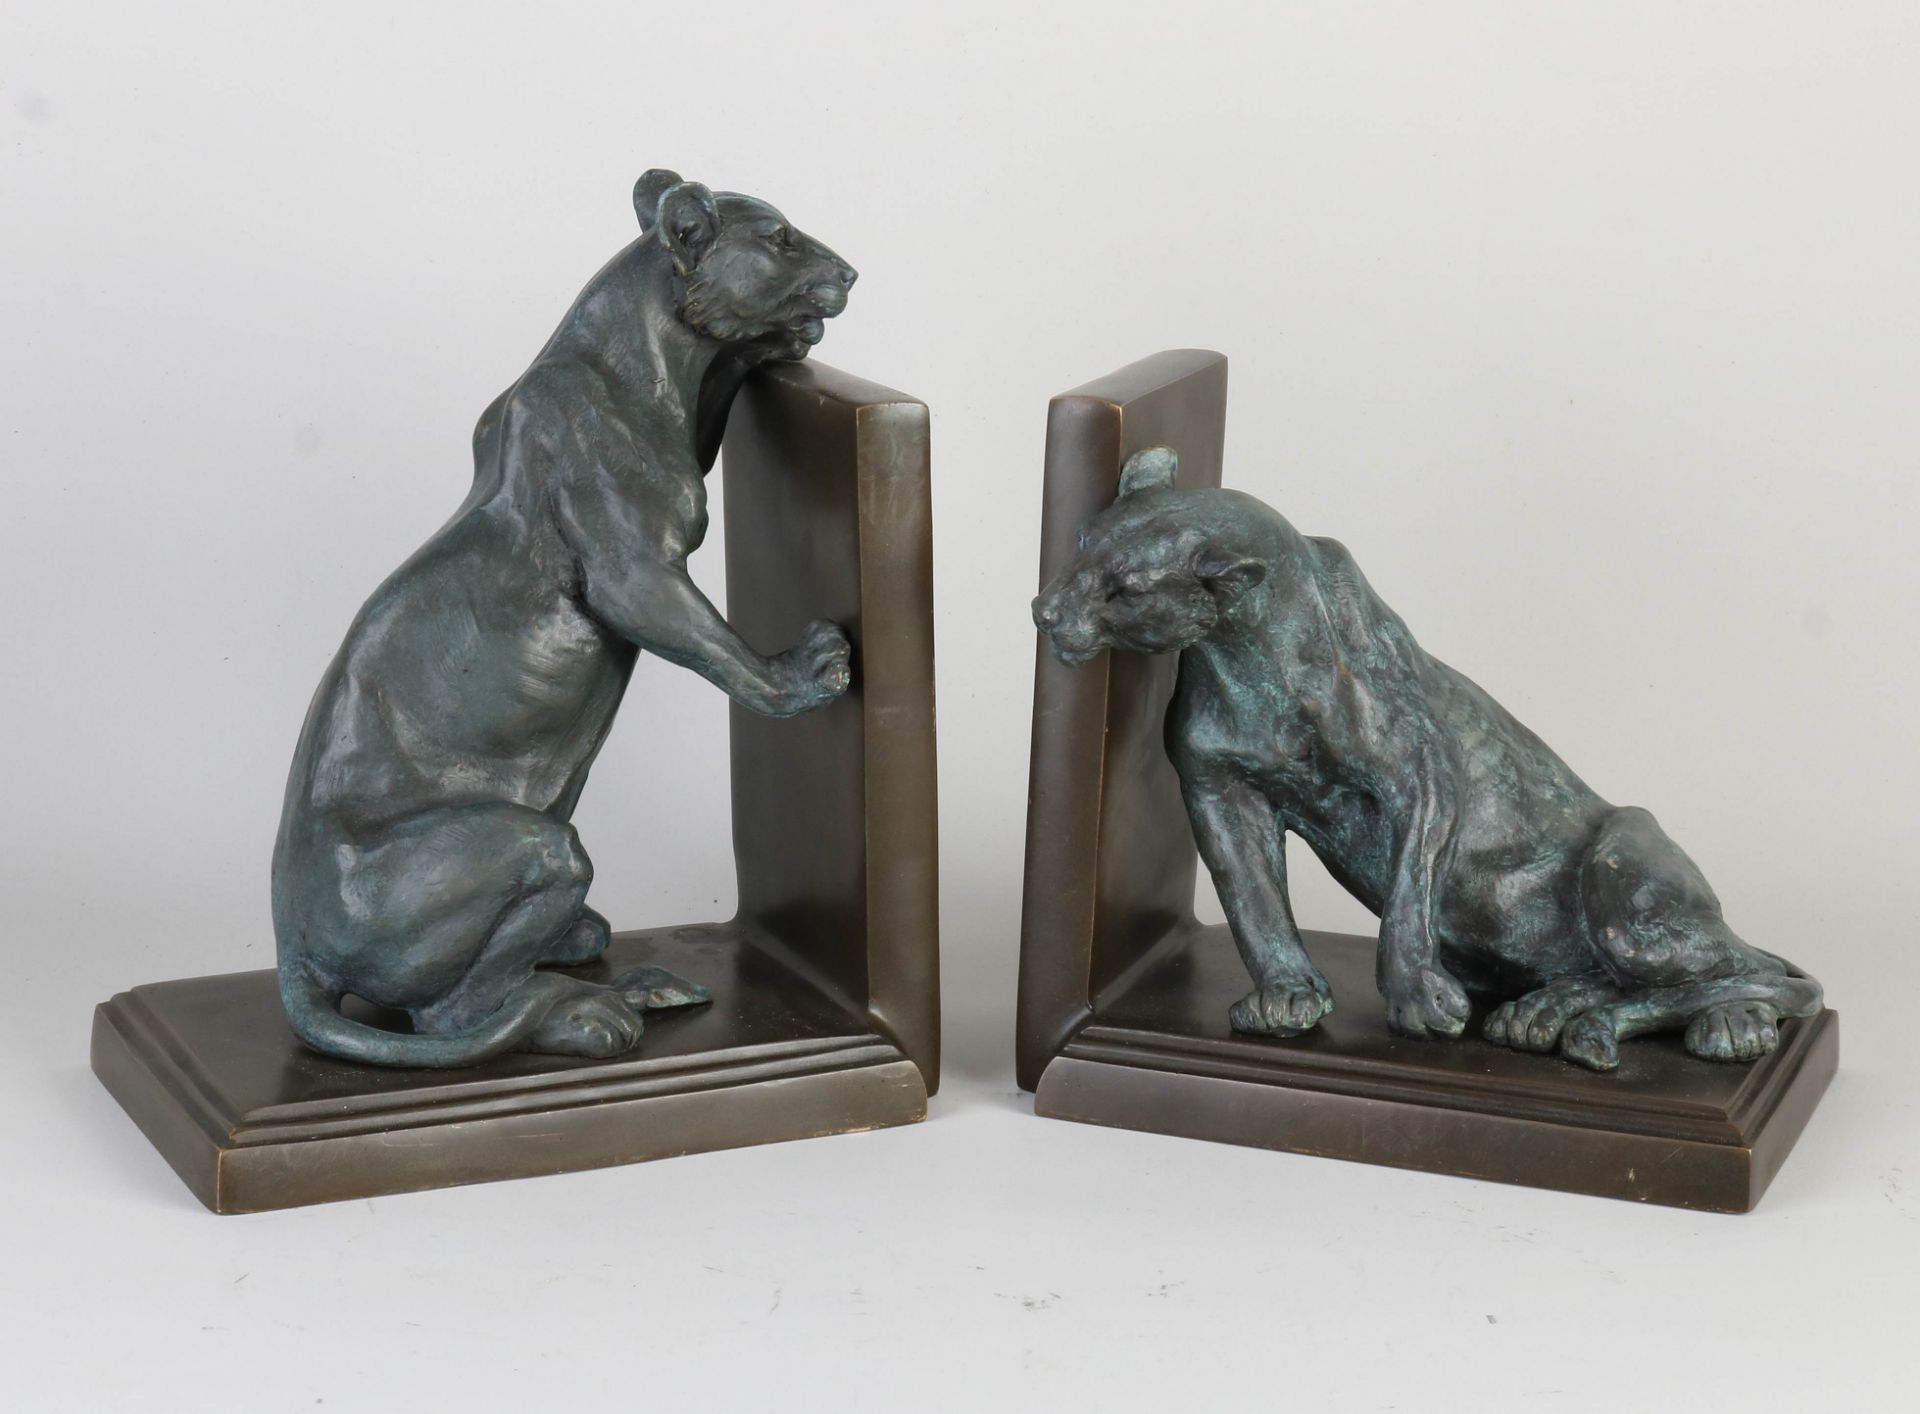 Set of bookends